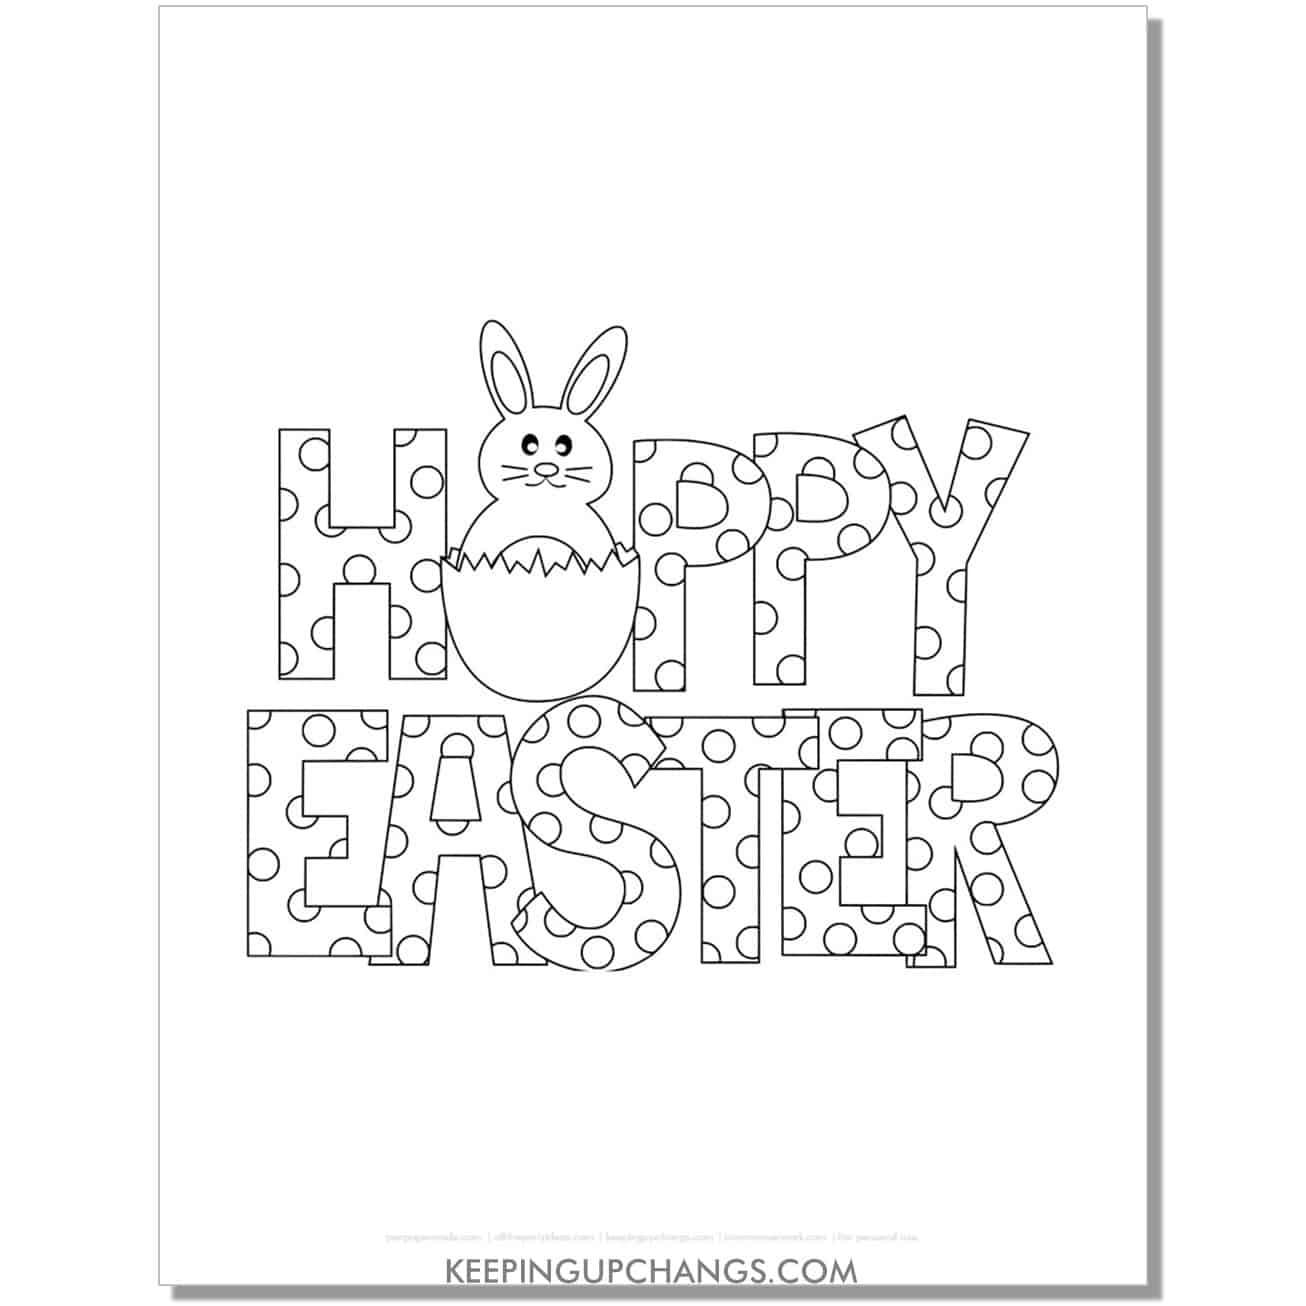 happy easter polka dot letters coloring page, sheet.